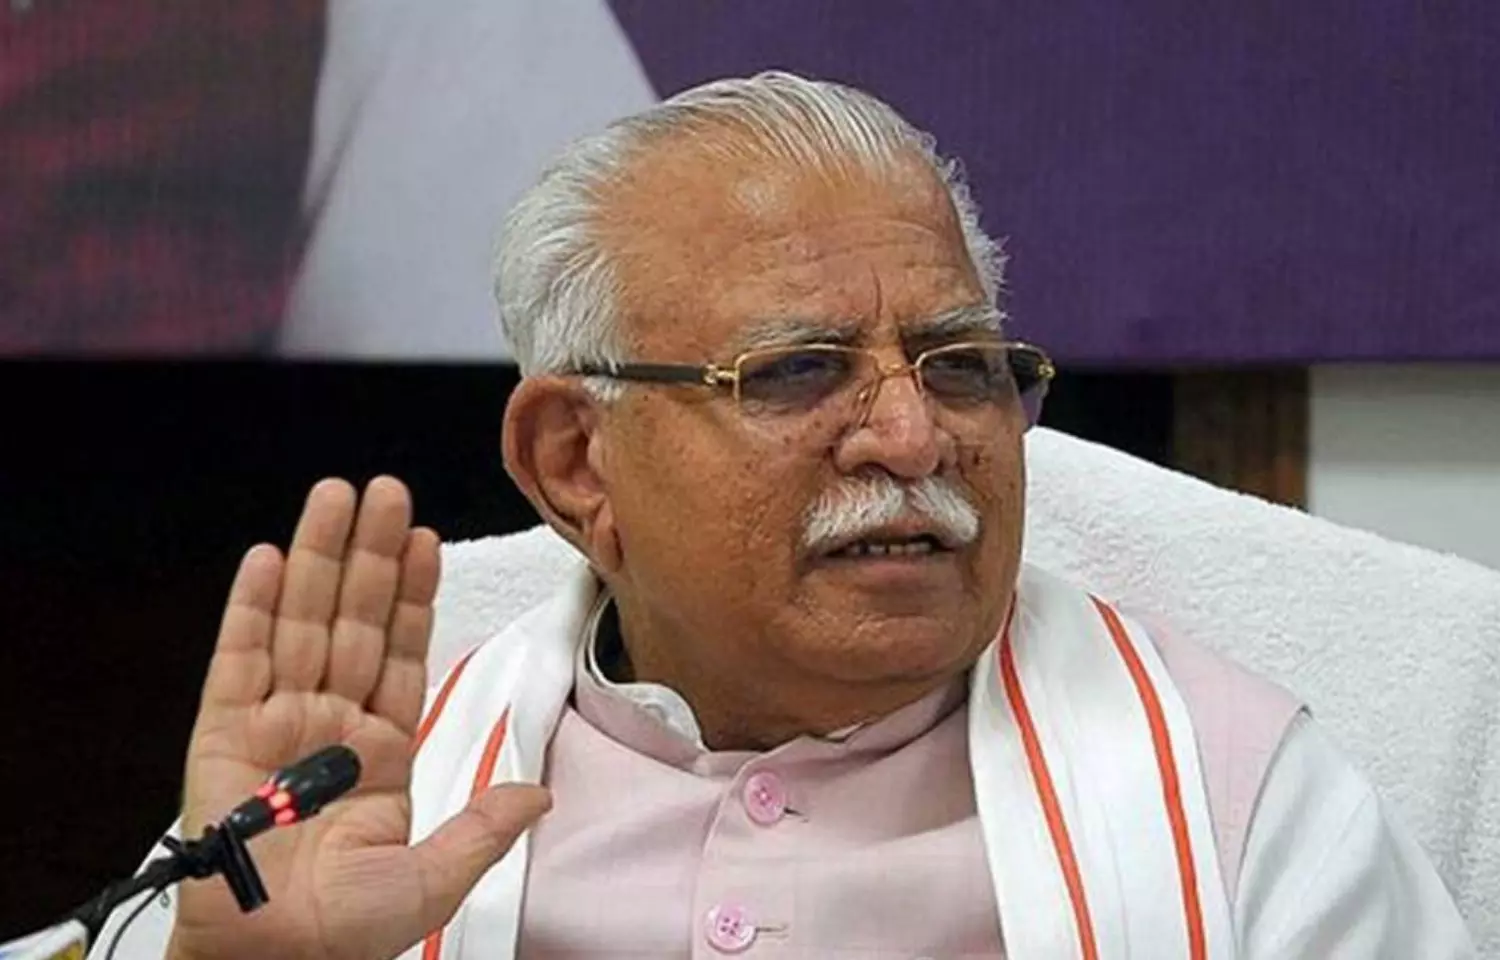 Sheetla Medical College to start OPD services from Sep 23, says CM Khattar